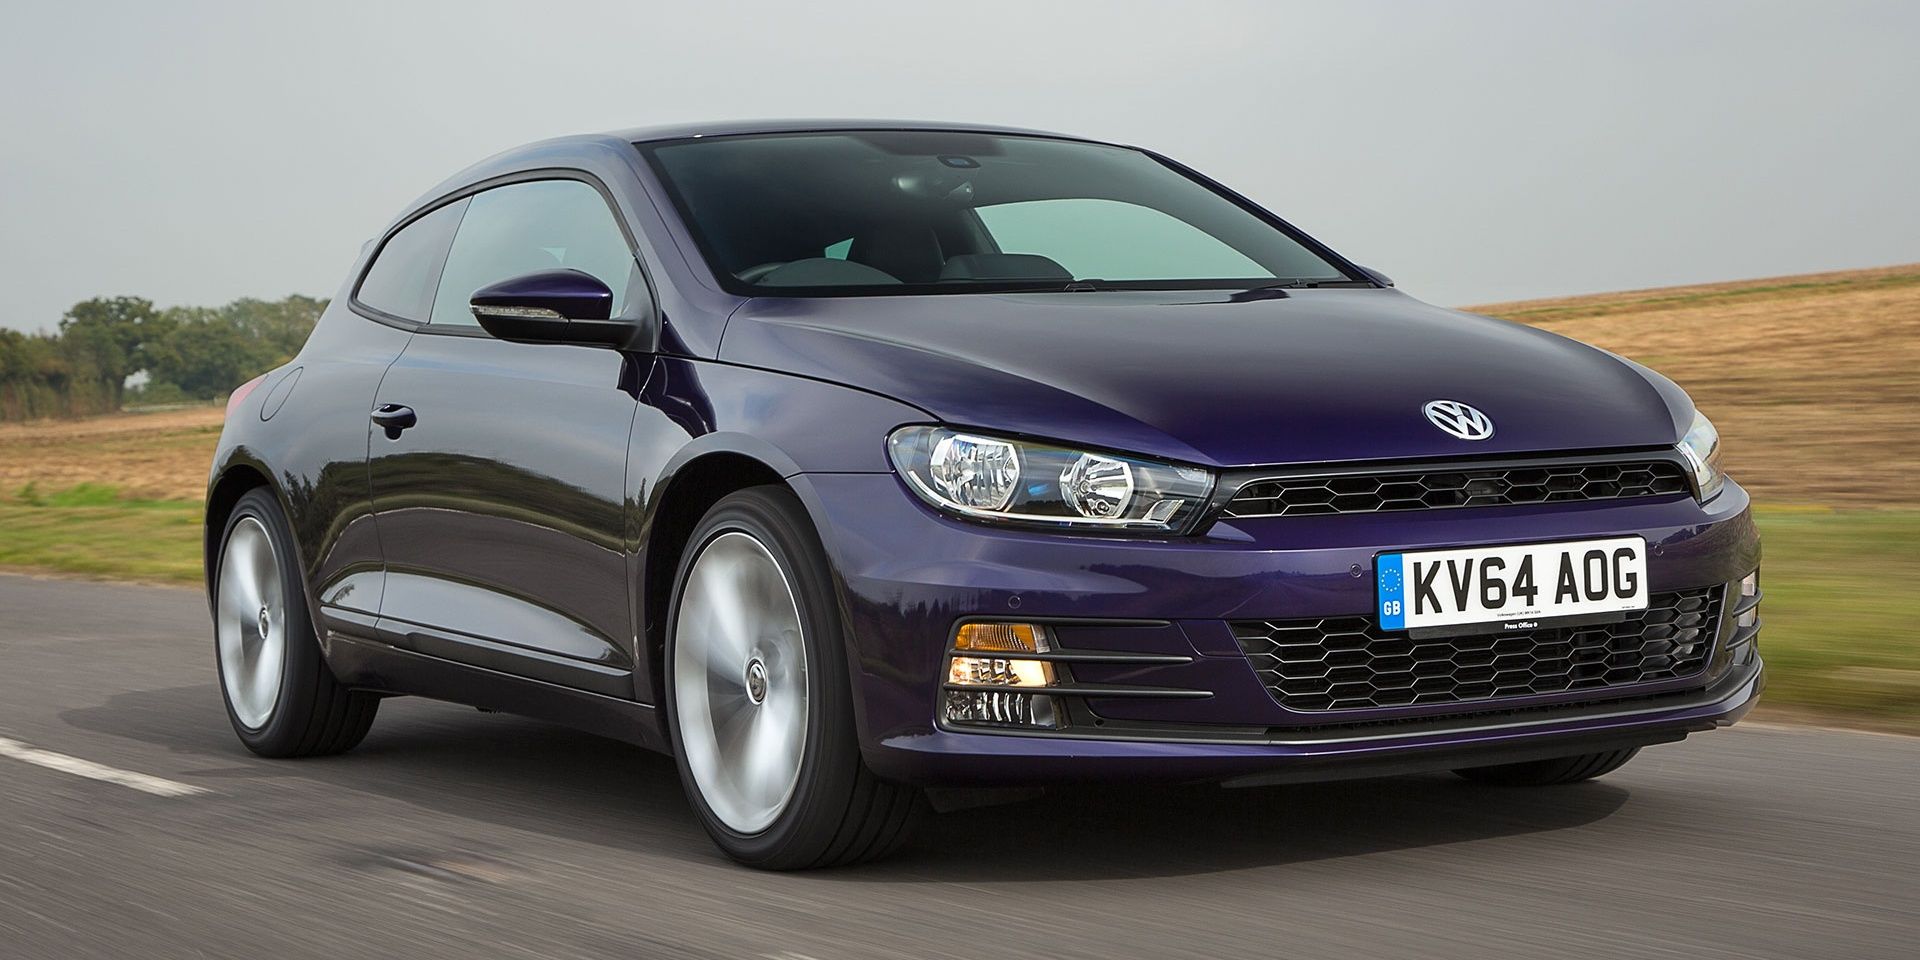 10 Reasons Why We Love The Volkswagen Scirocco